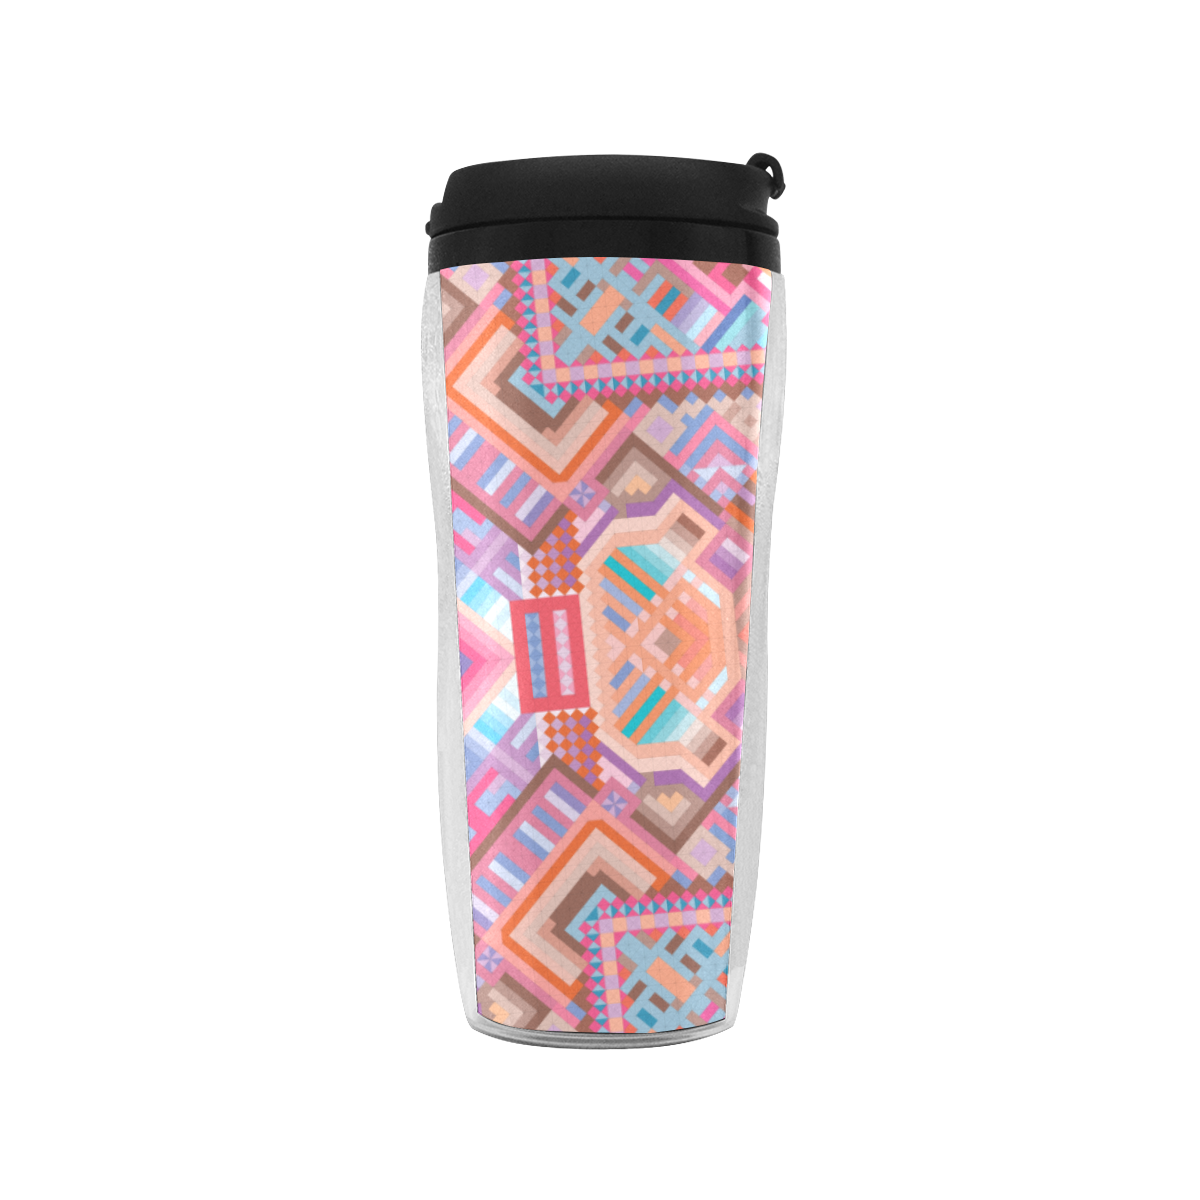 Researcher Reusable Coffee Cup (11.8oz)